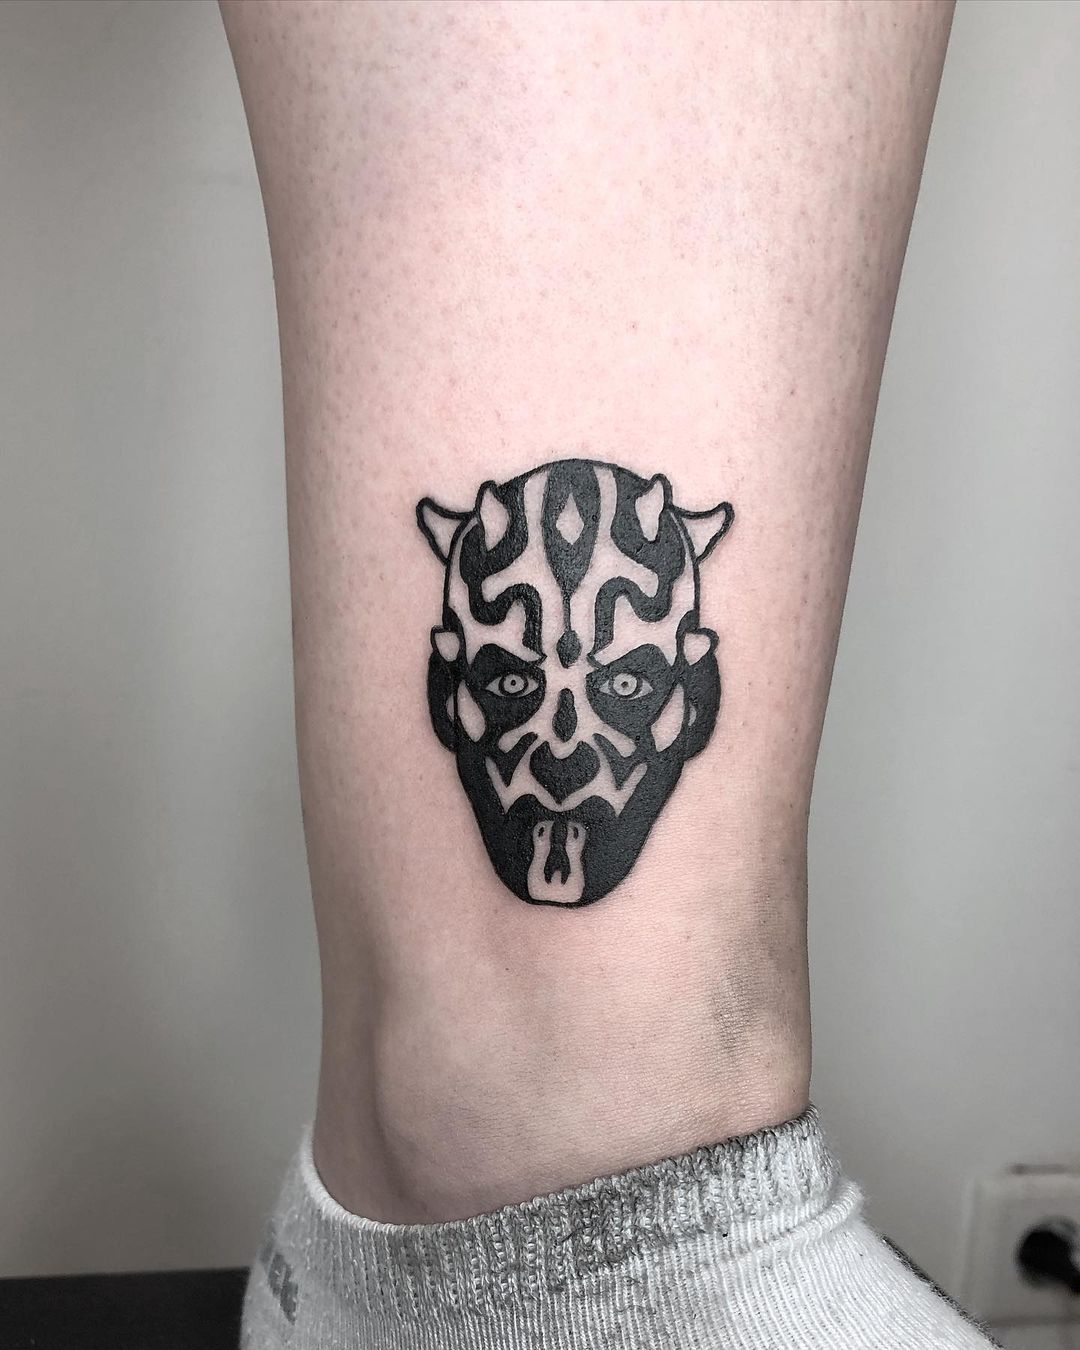 17 Darth Maul Tattoos that will inspire you!